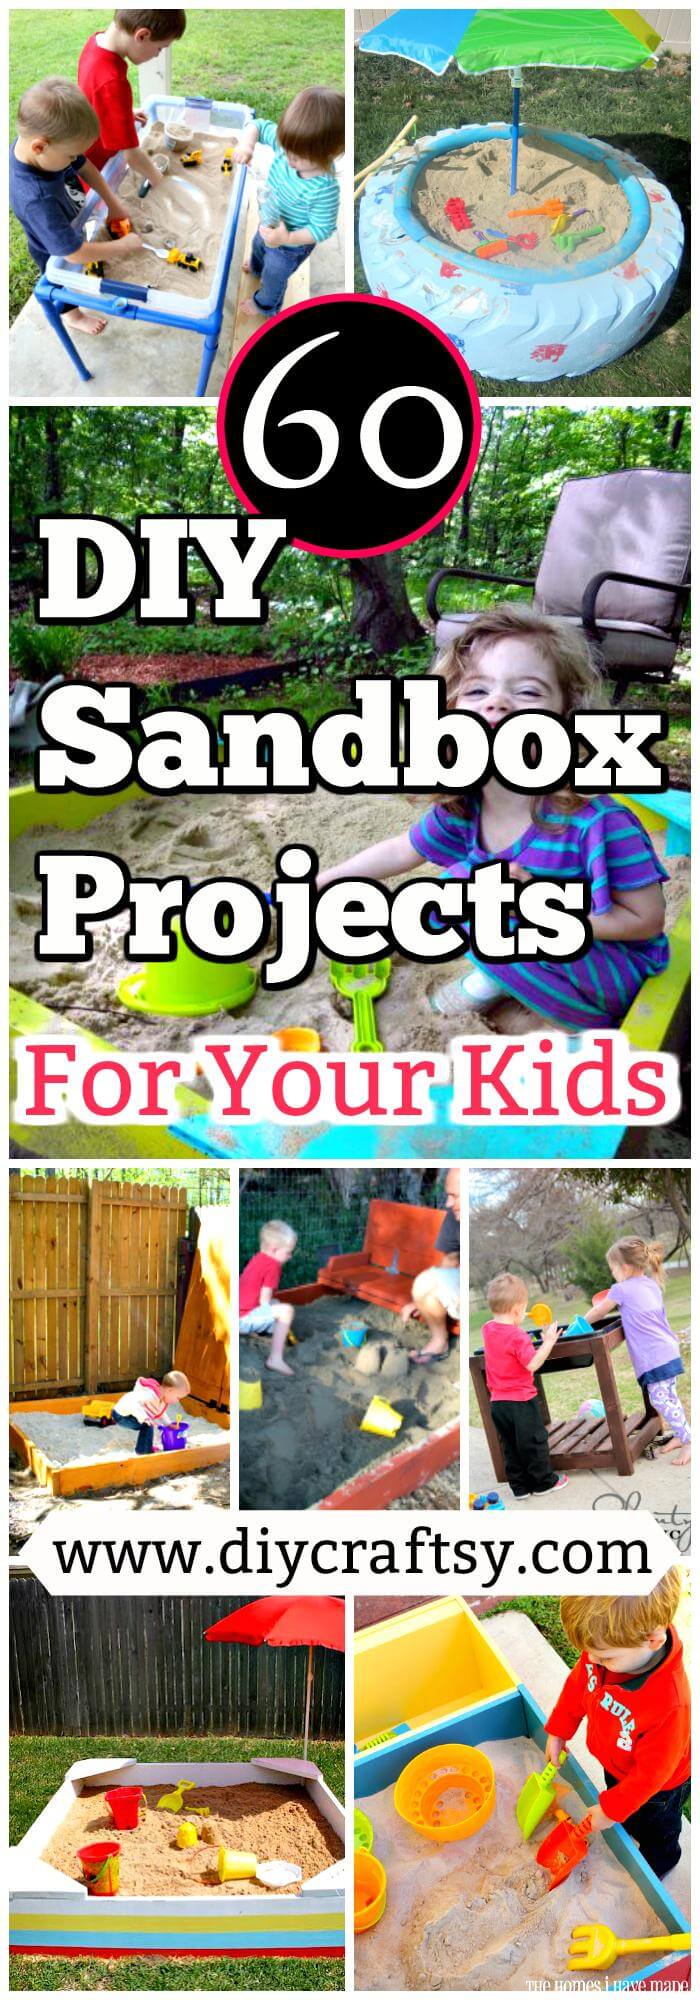 60-DIY-Sandbox-Ideas-and-Projects-for-Kids